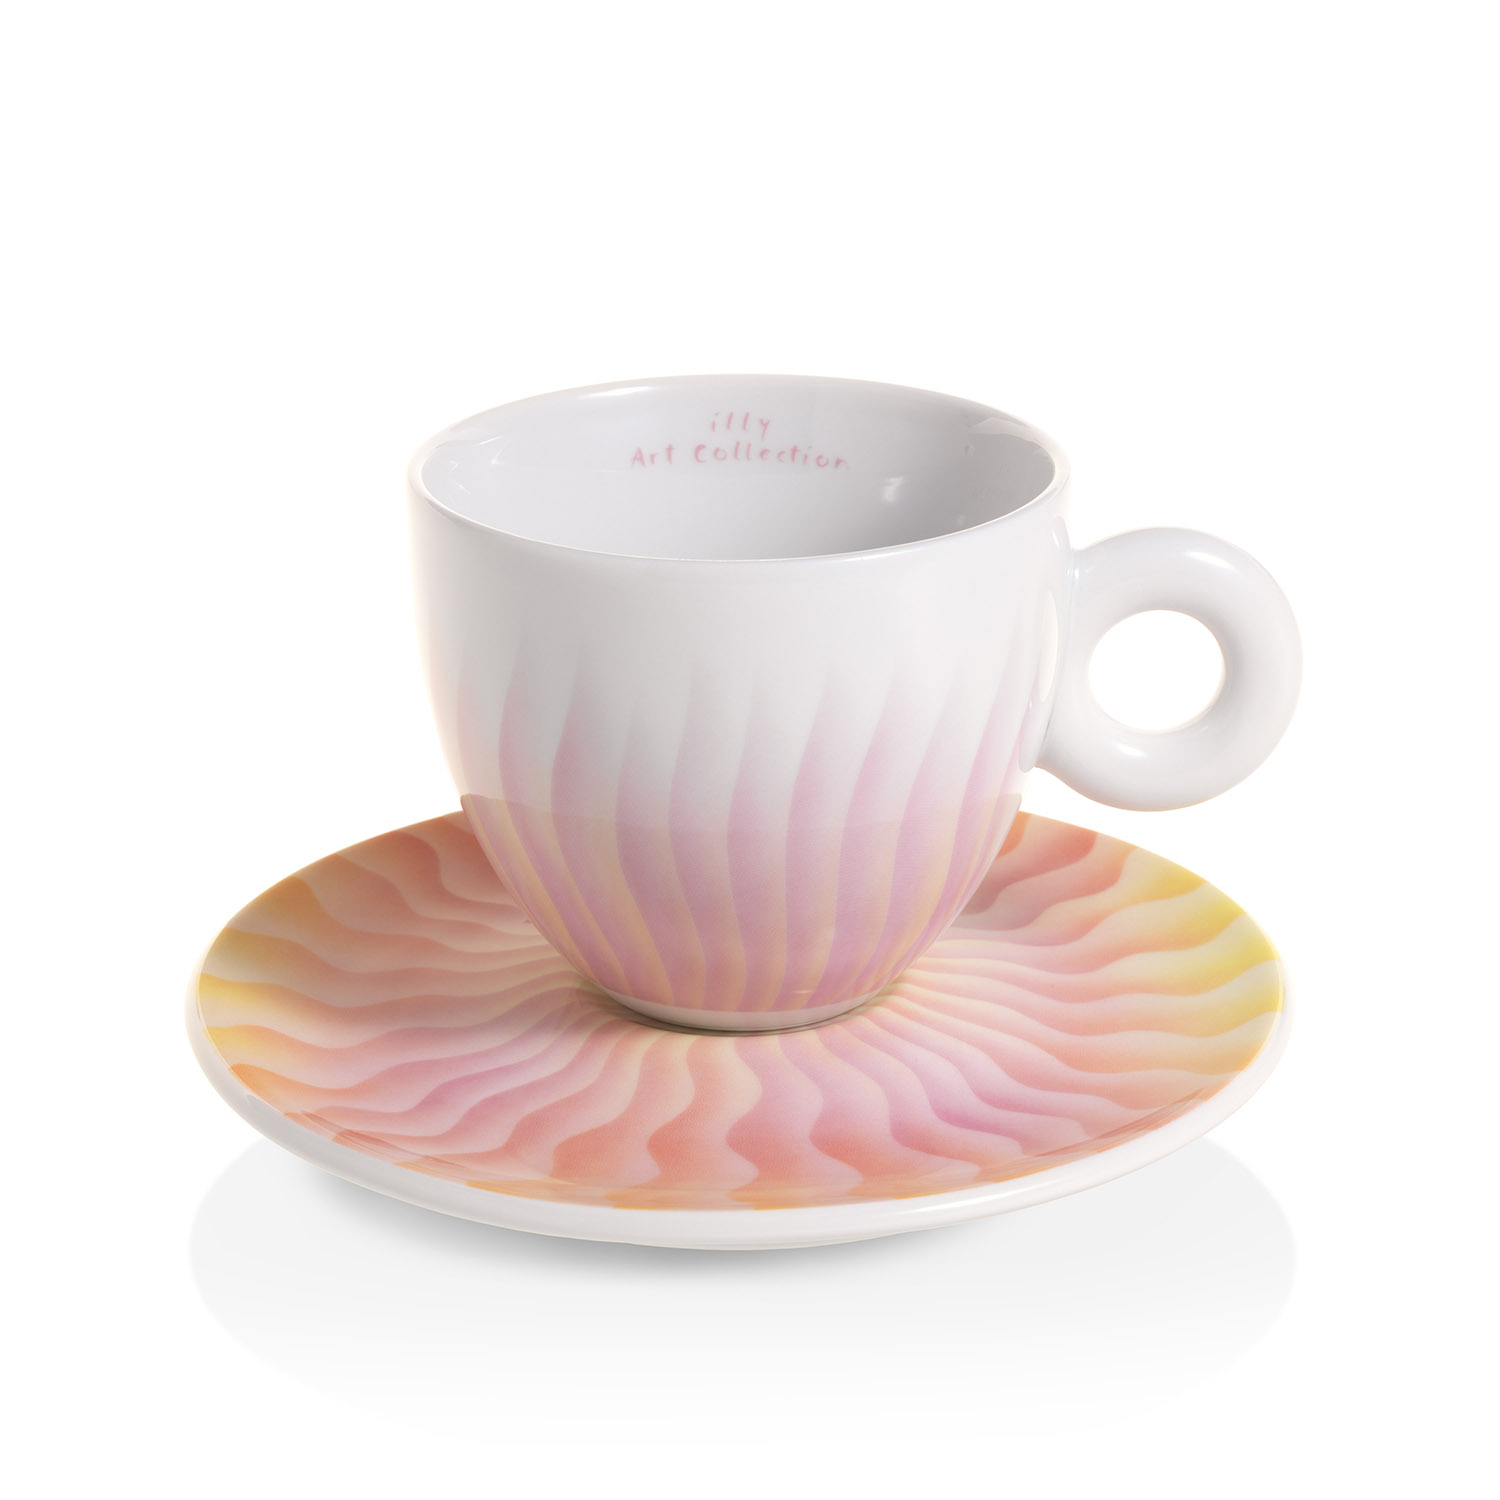 Set of 4 Cappuccino Cups - the Judy Chicago illy Art Collection